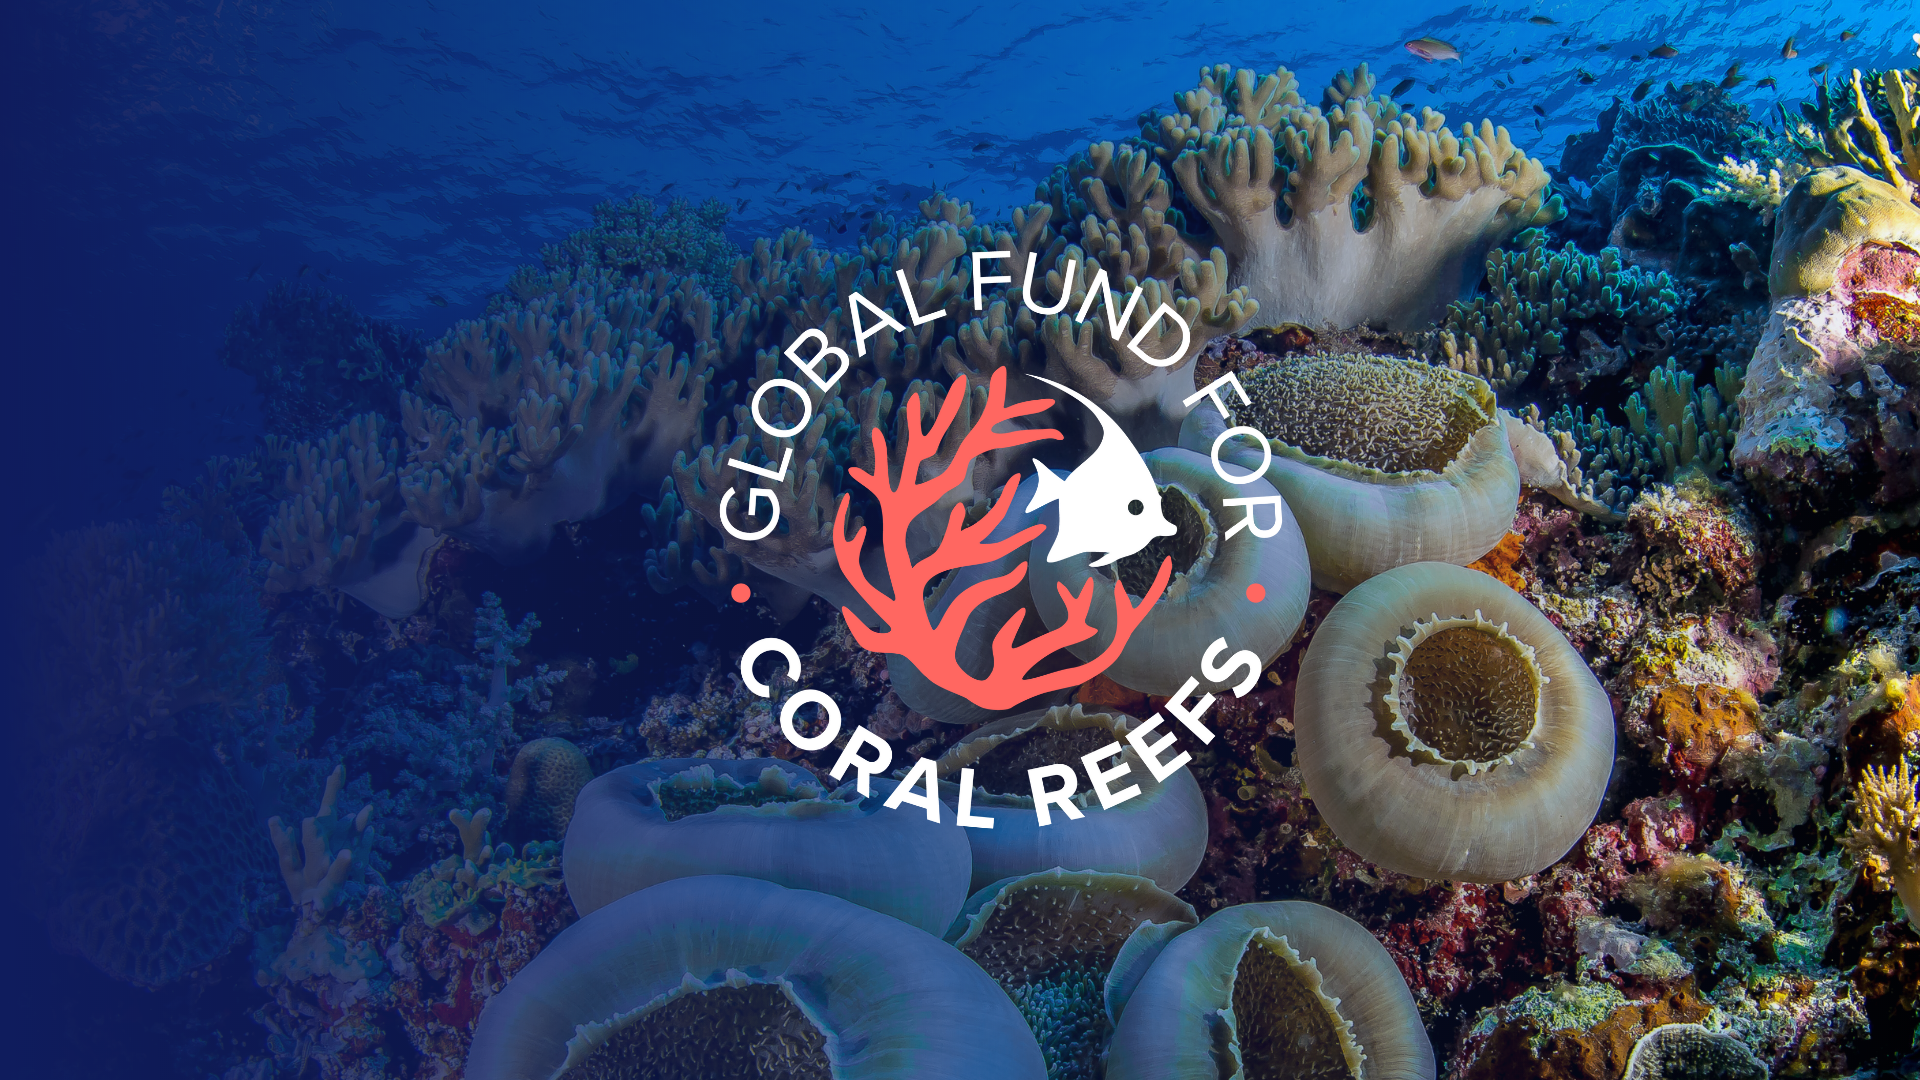 Global Fund for Coral Reefs logo and picture of anemones 